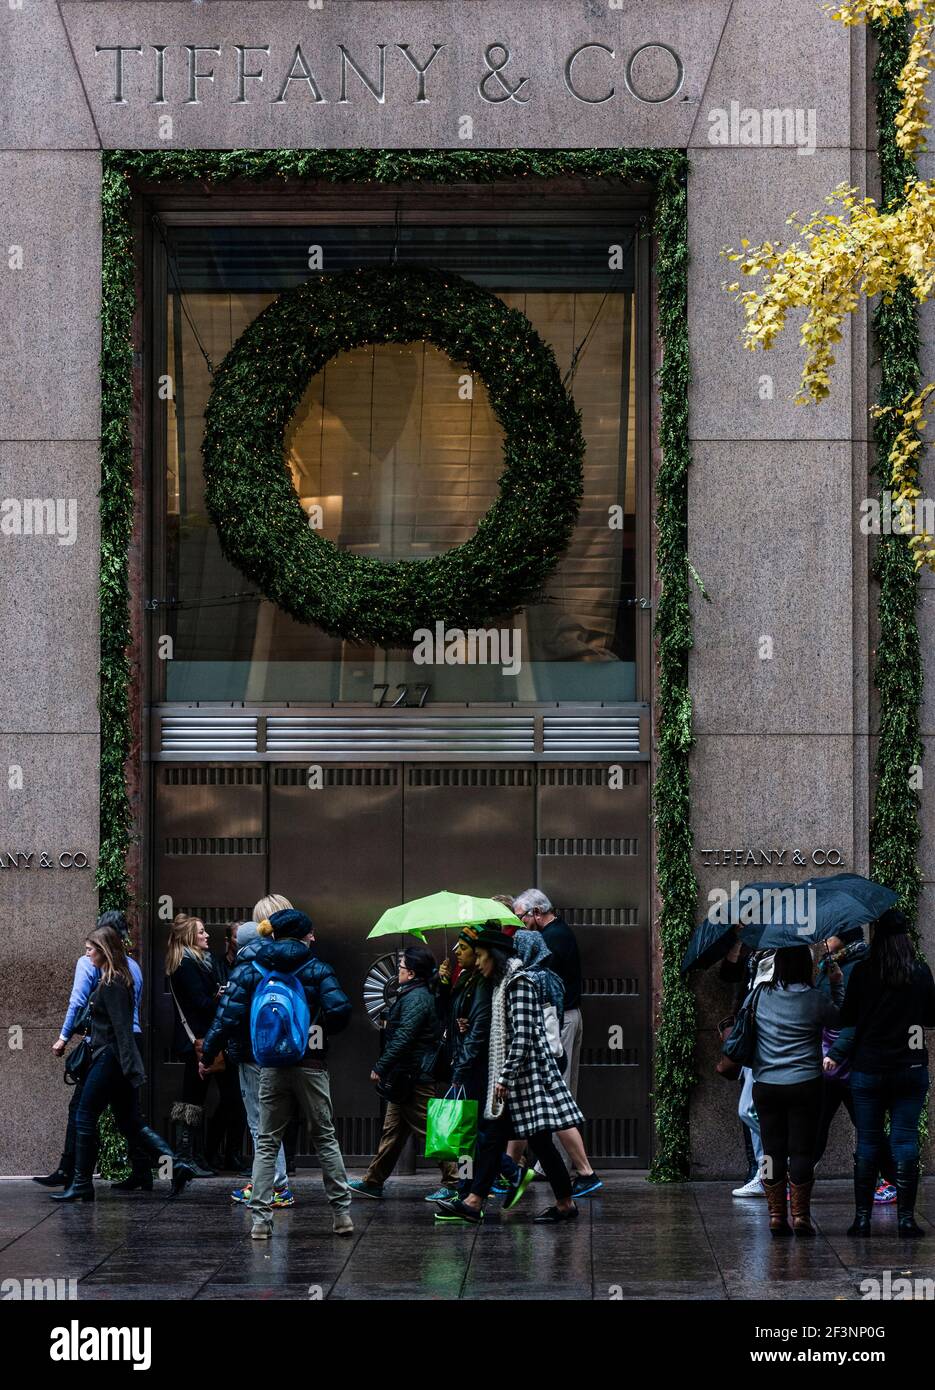 NEW YORK CITY - MARCH 14, 2014: Exterior View Of Tiffany & Co., Along  Fashionable Fifth Avenue In Manhattan. Stock Photo, Picture and Royalty  Free Image. Image 68011184.